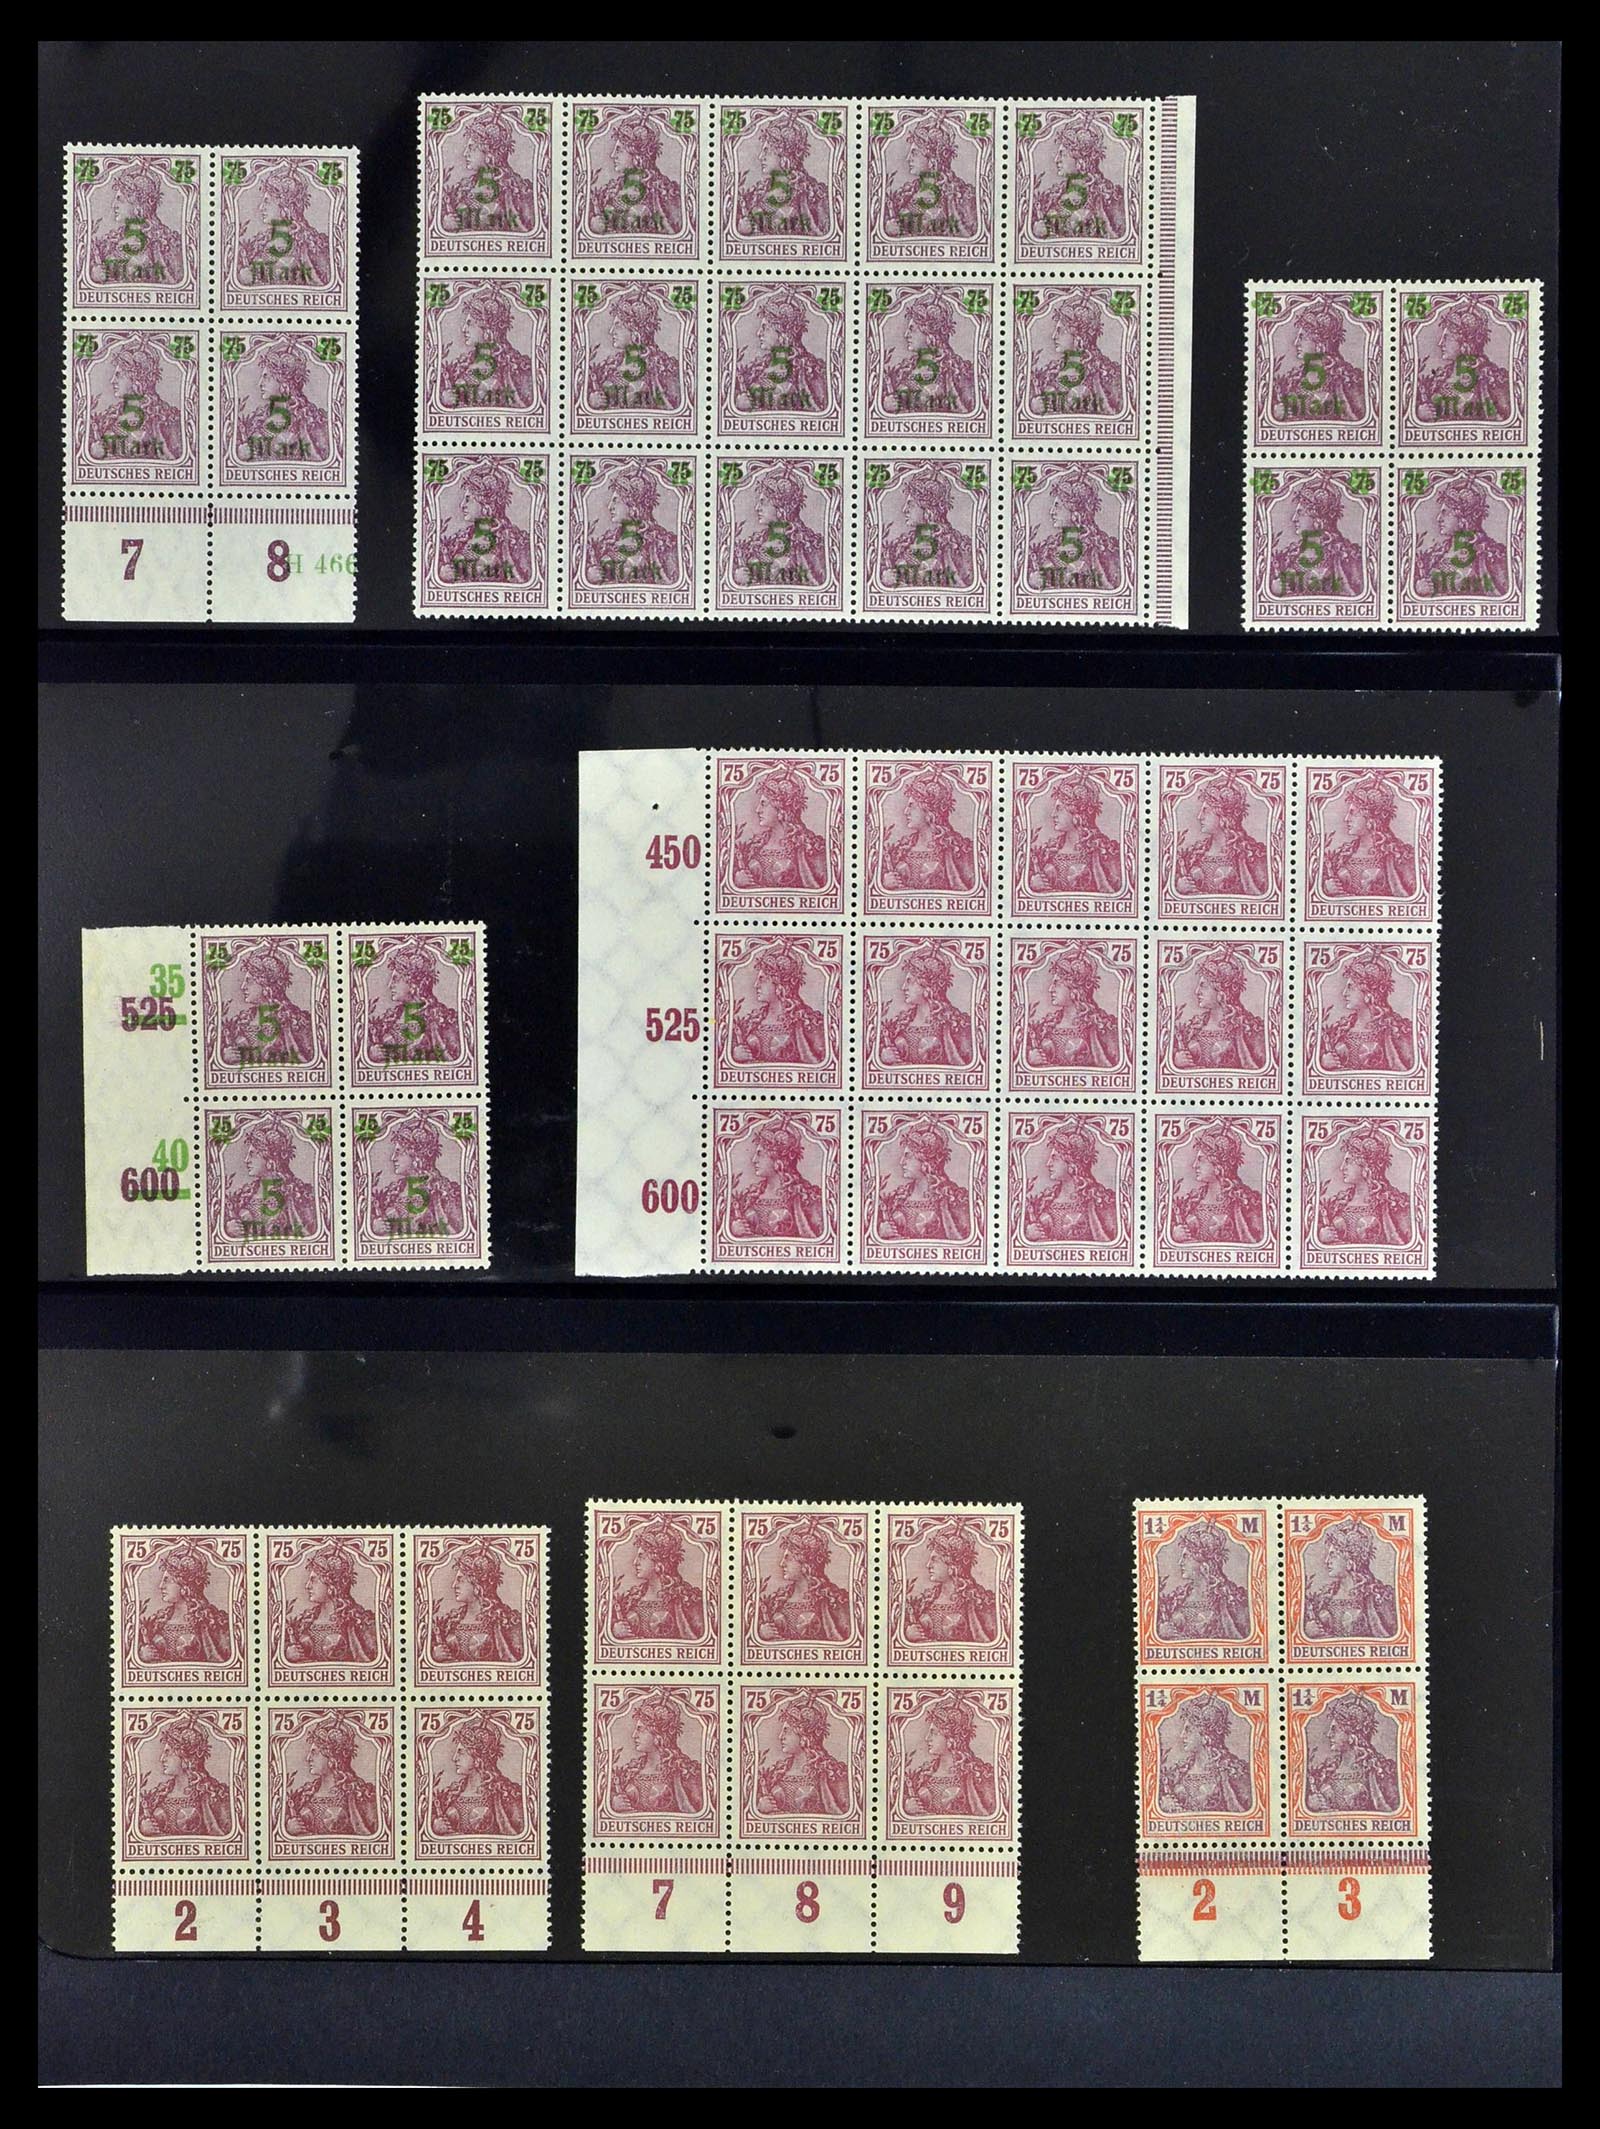 39255 0010 - Stamp collection 39255 German Reich MNH blocks of 4.